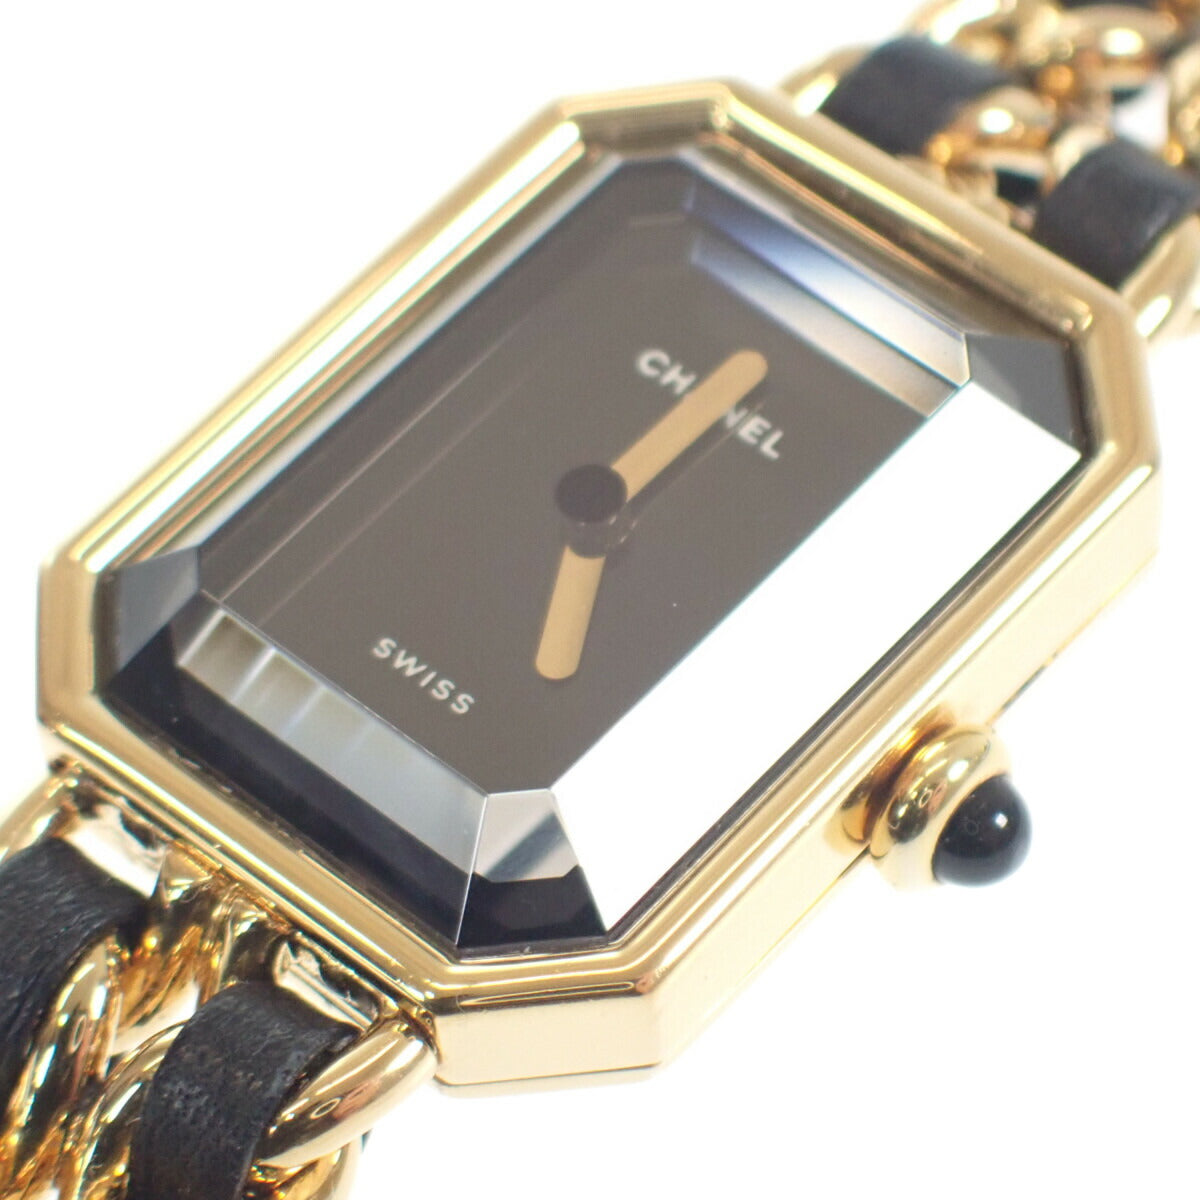 Chanel Women's Premiere Watch H0001 in Black and Gold, Leather Strap, Black Quartz Dial, Size L (Pre-owned) H0001